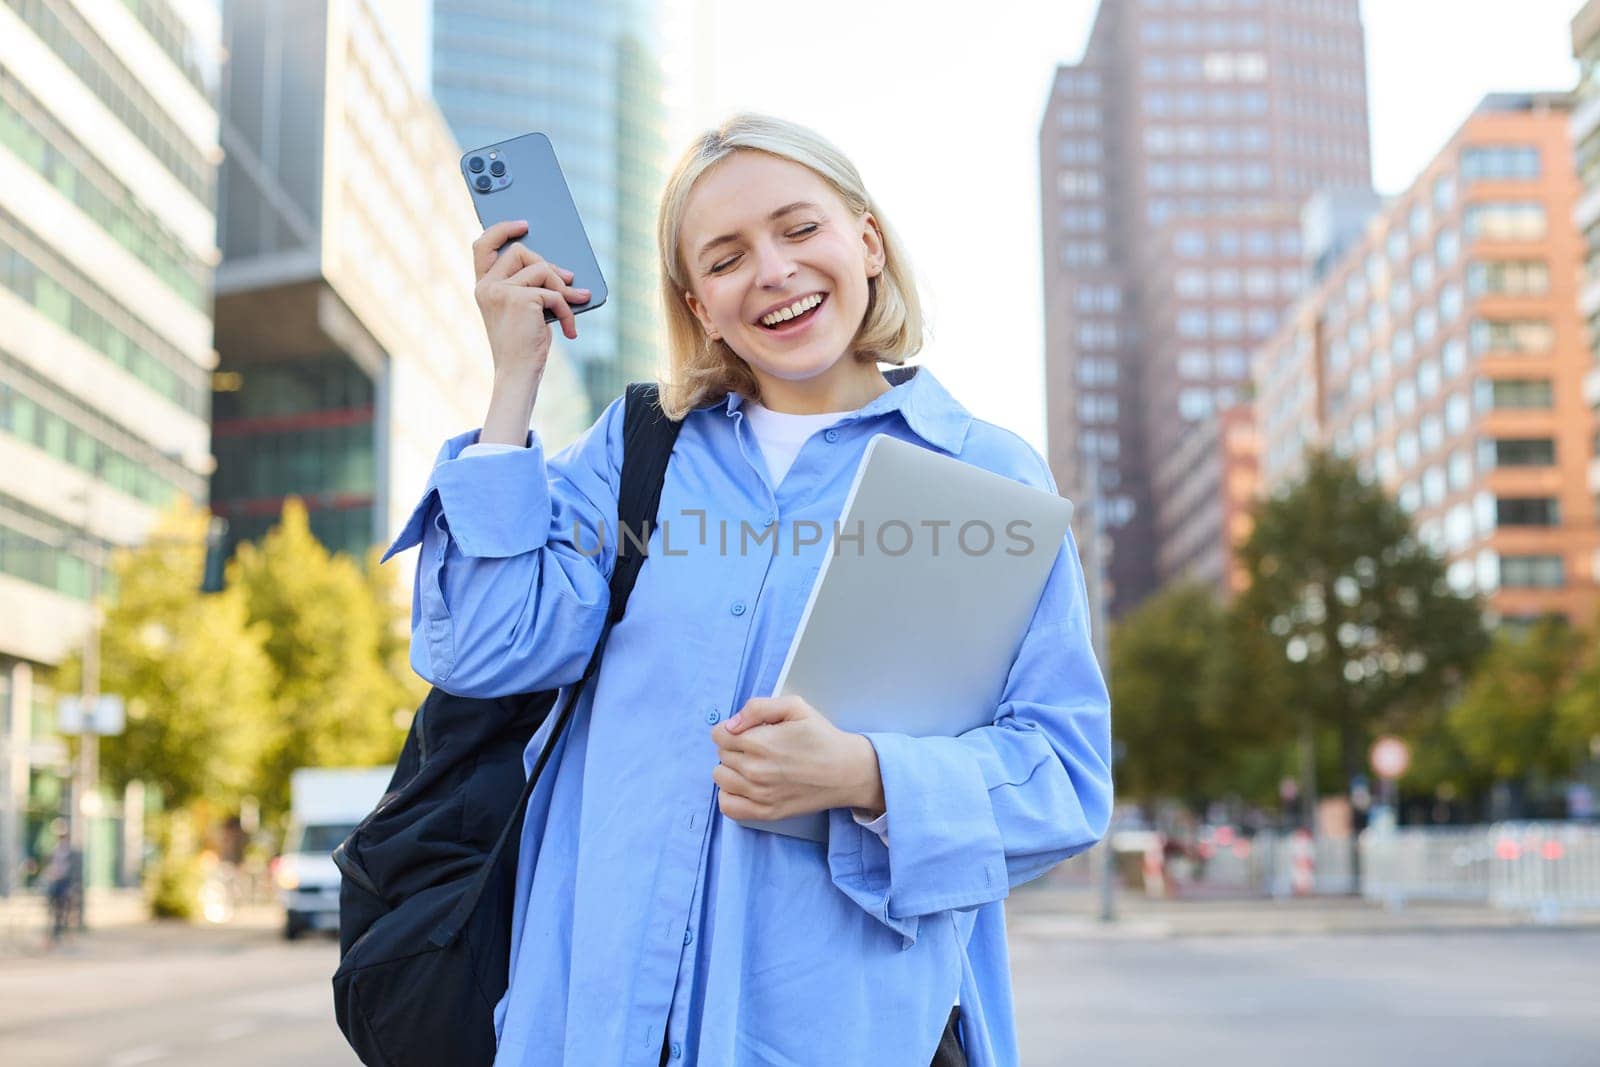 Enthusiastic blond woman, shaking smartphone in hand, holding laptop, standing on street of city centre, laughing and smiling, looking pleased, triumphing.